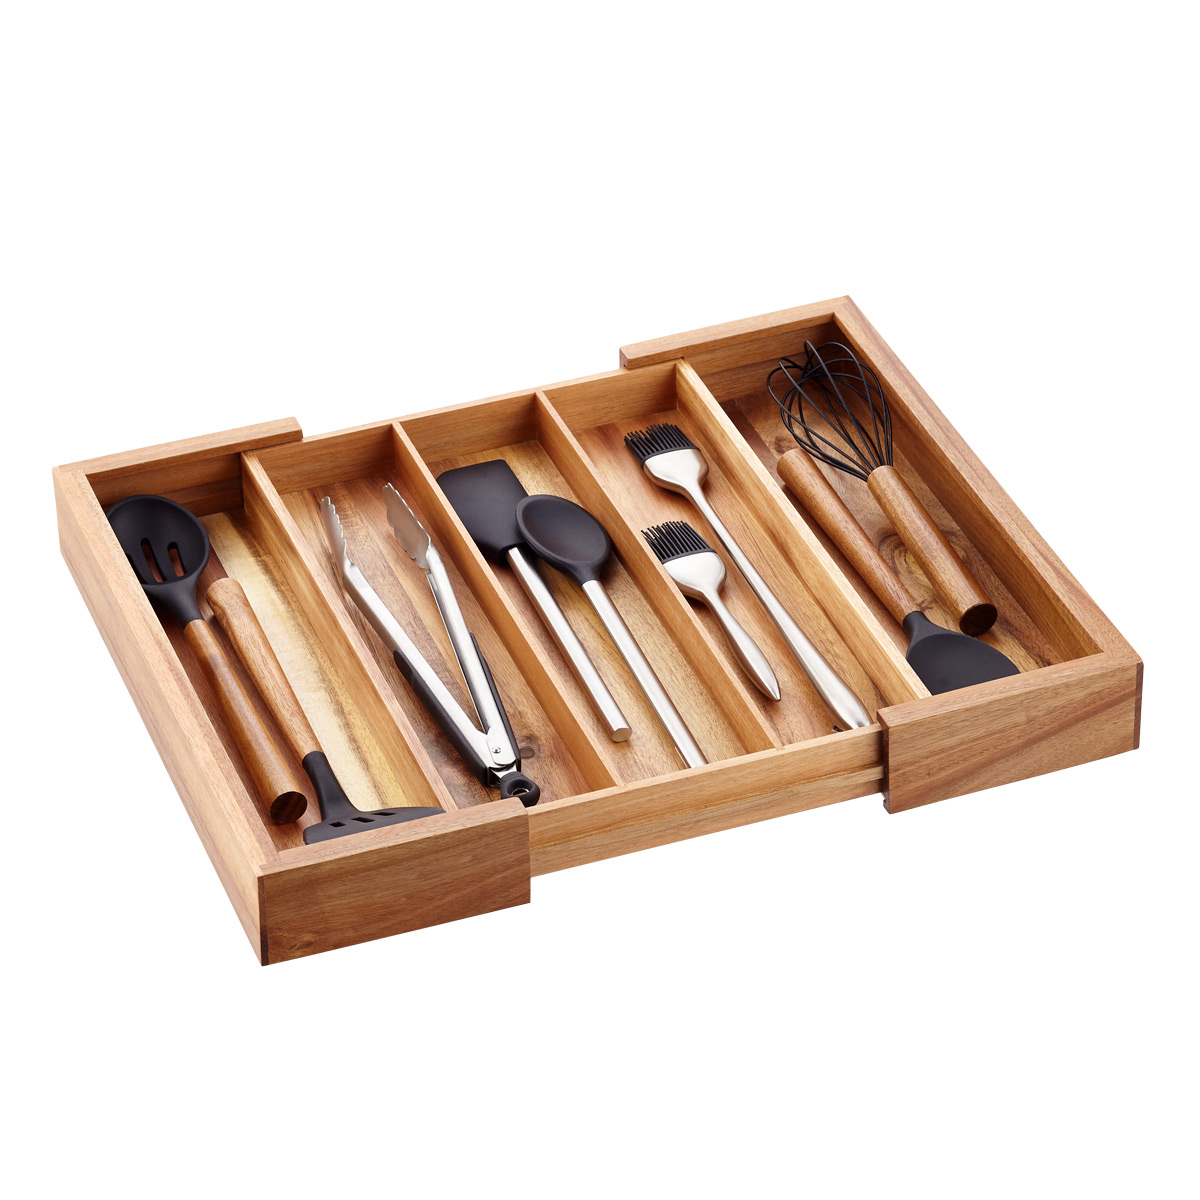 https://www.containerstore.com/catalogimages/375922/10079619-acacia-expandable-utensil-t.jpg